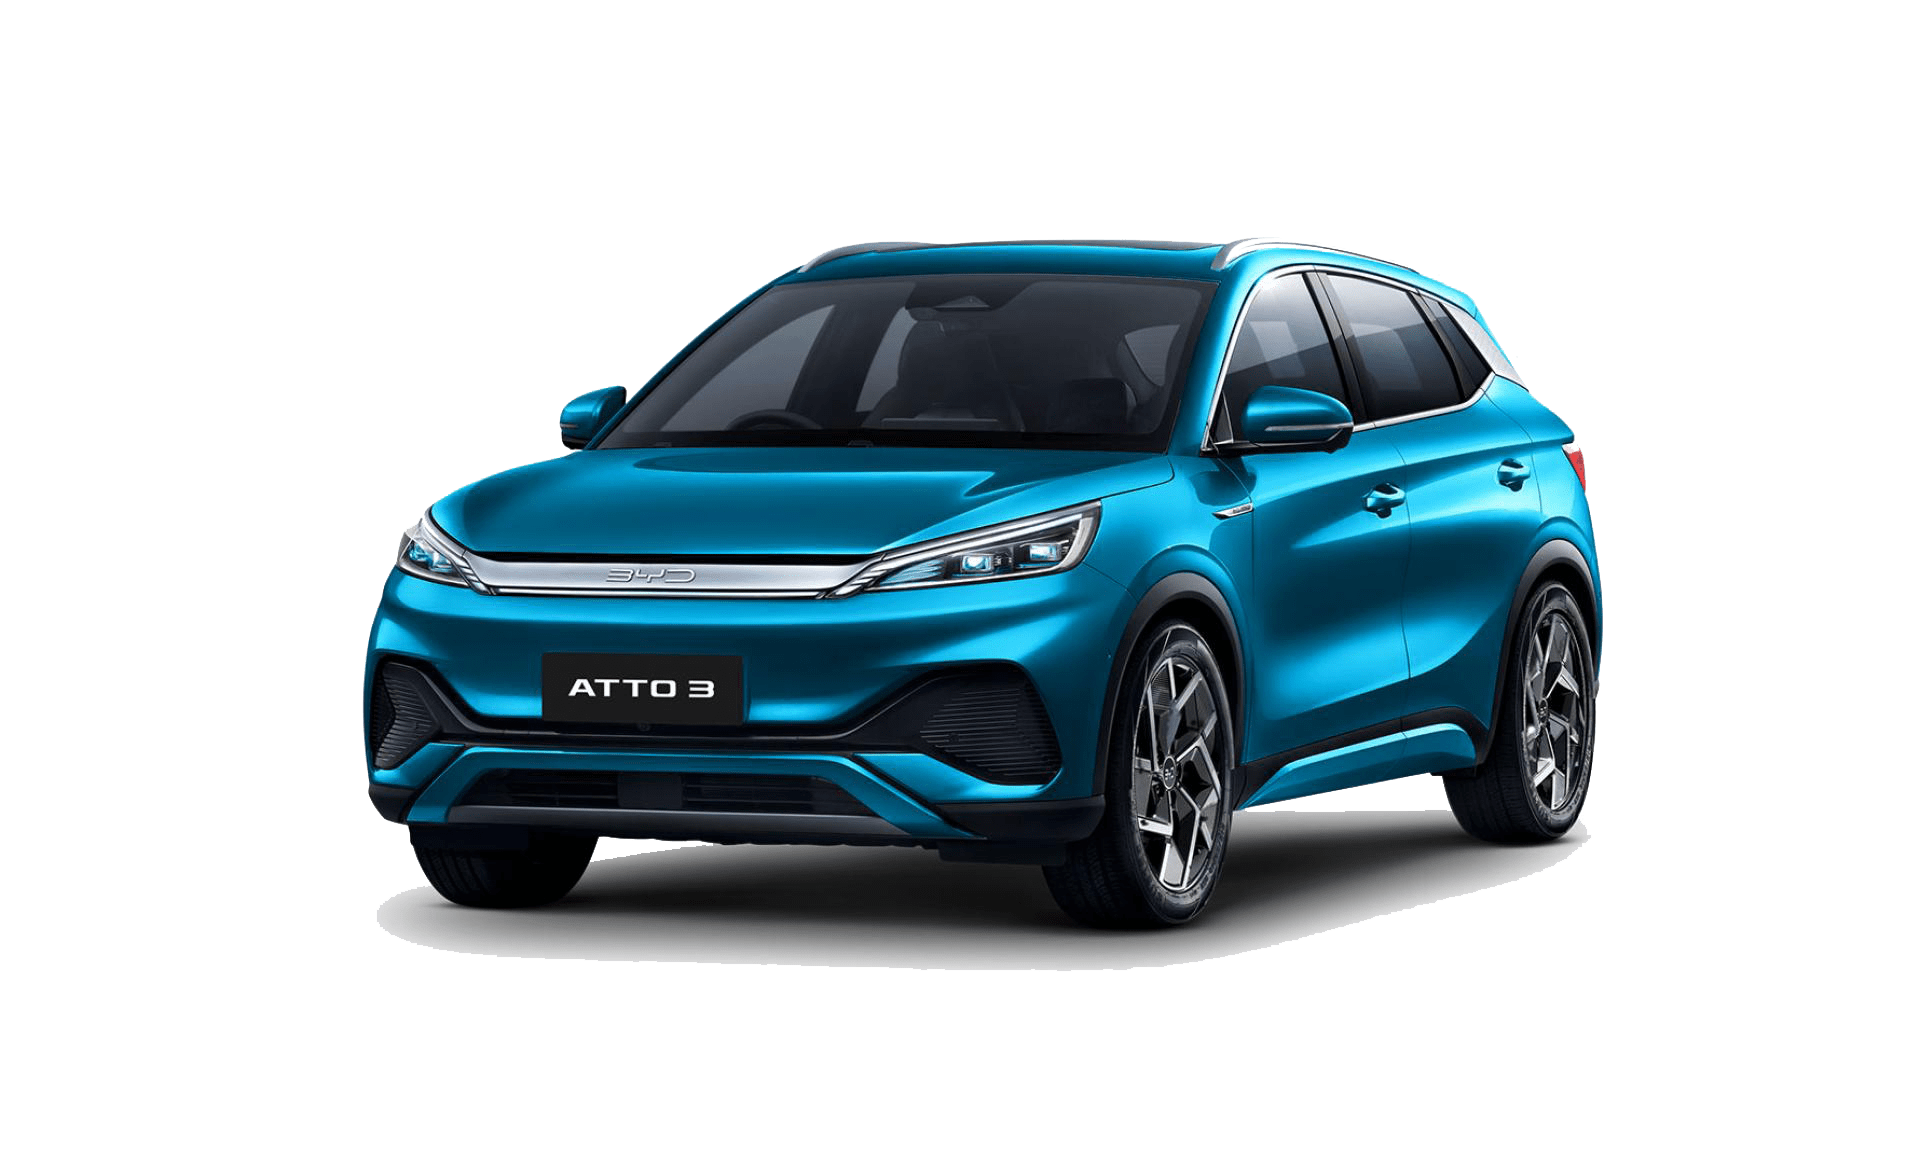 BYD Atto 3 Reviews, Specs, For Sale & News in Australia